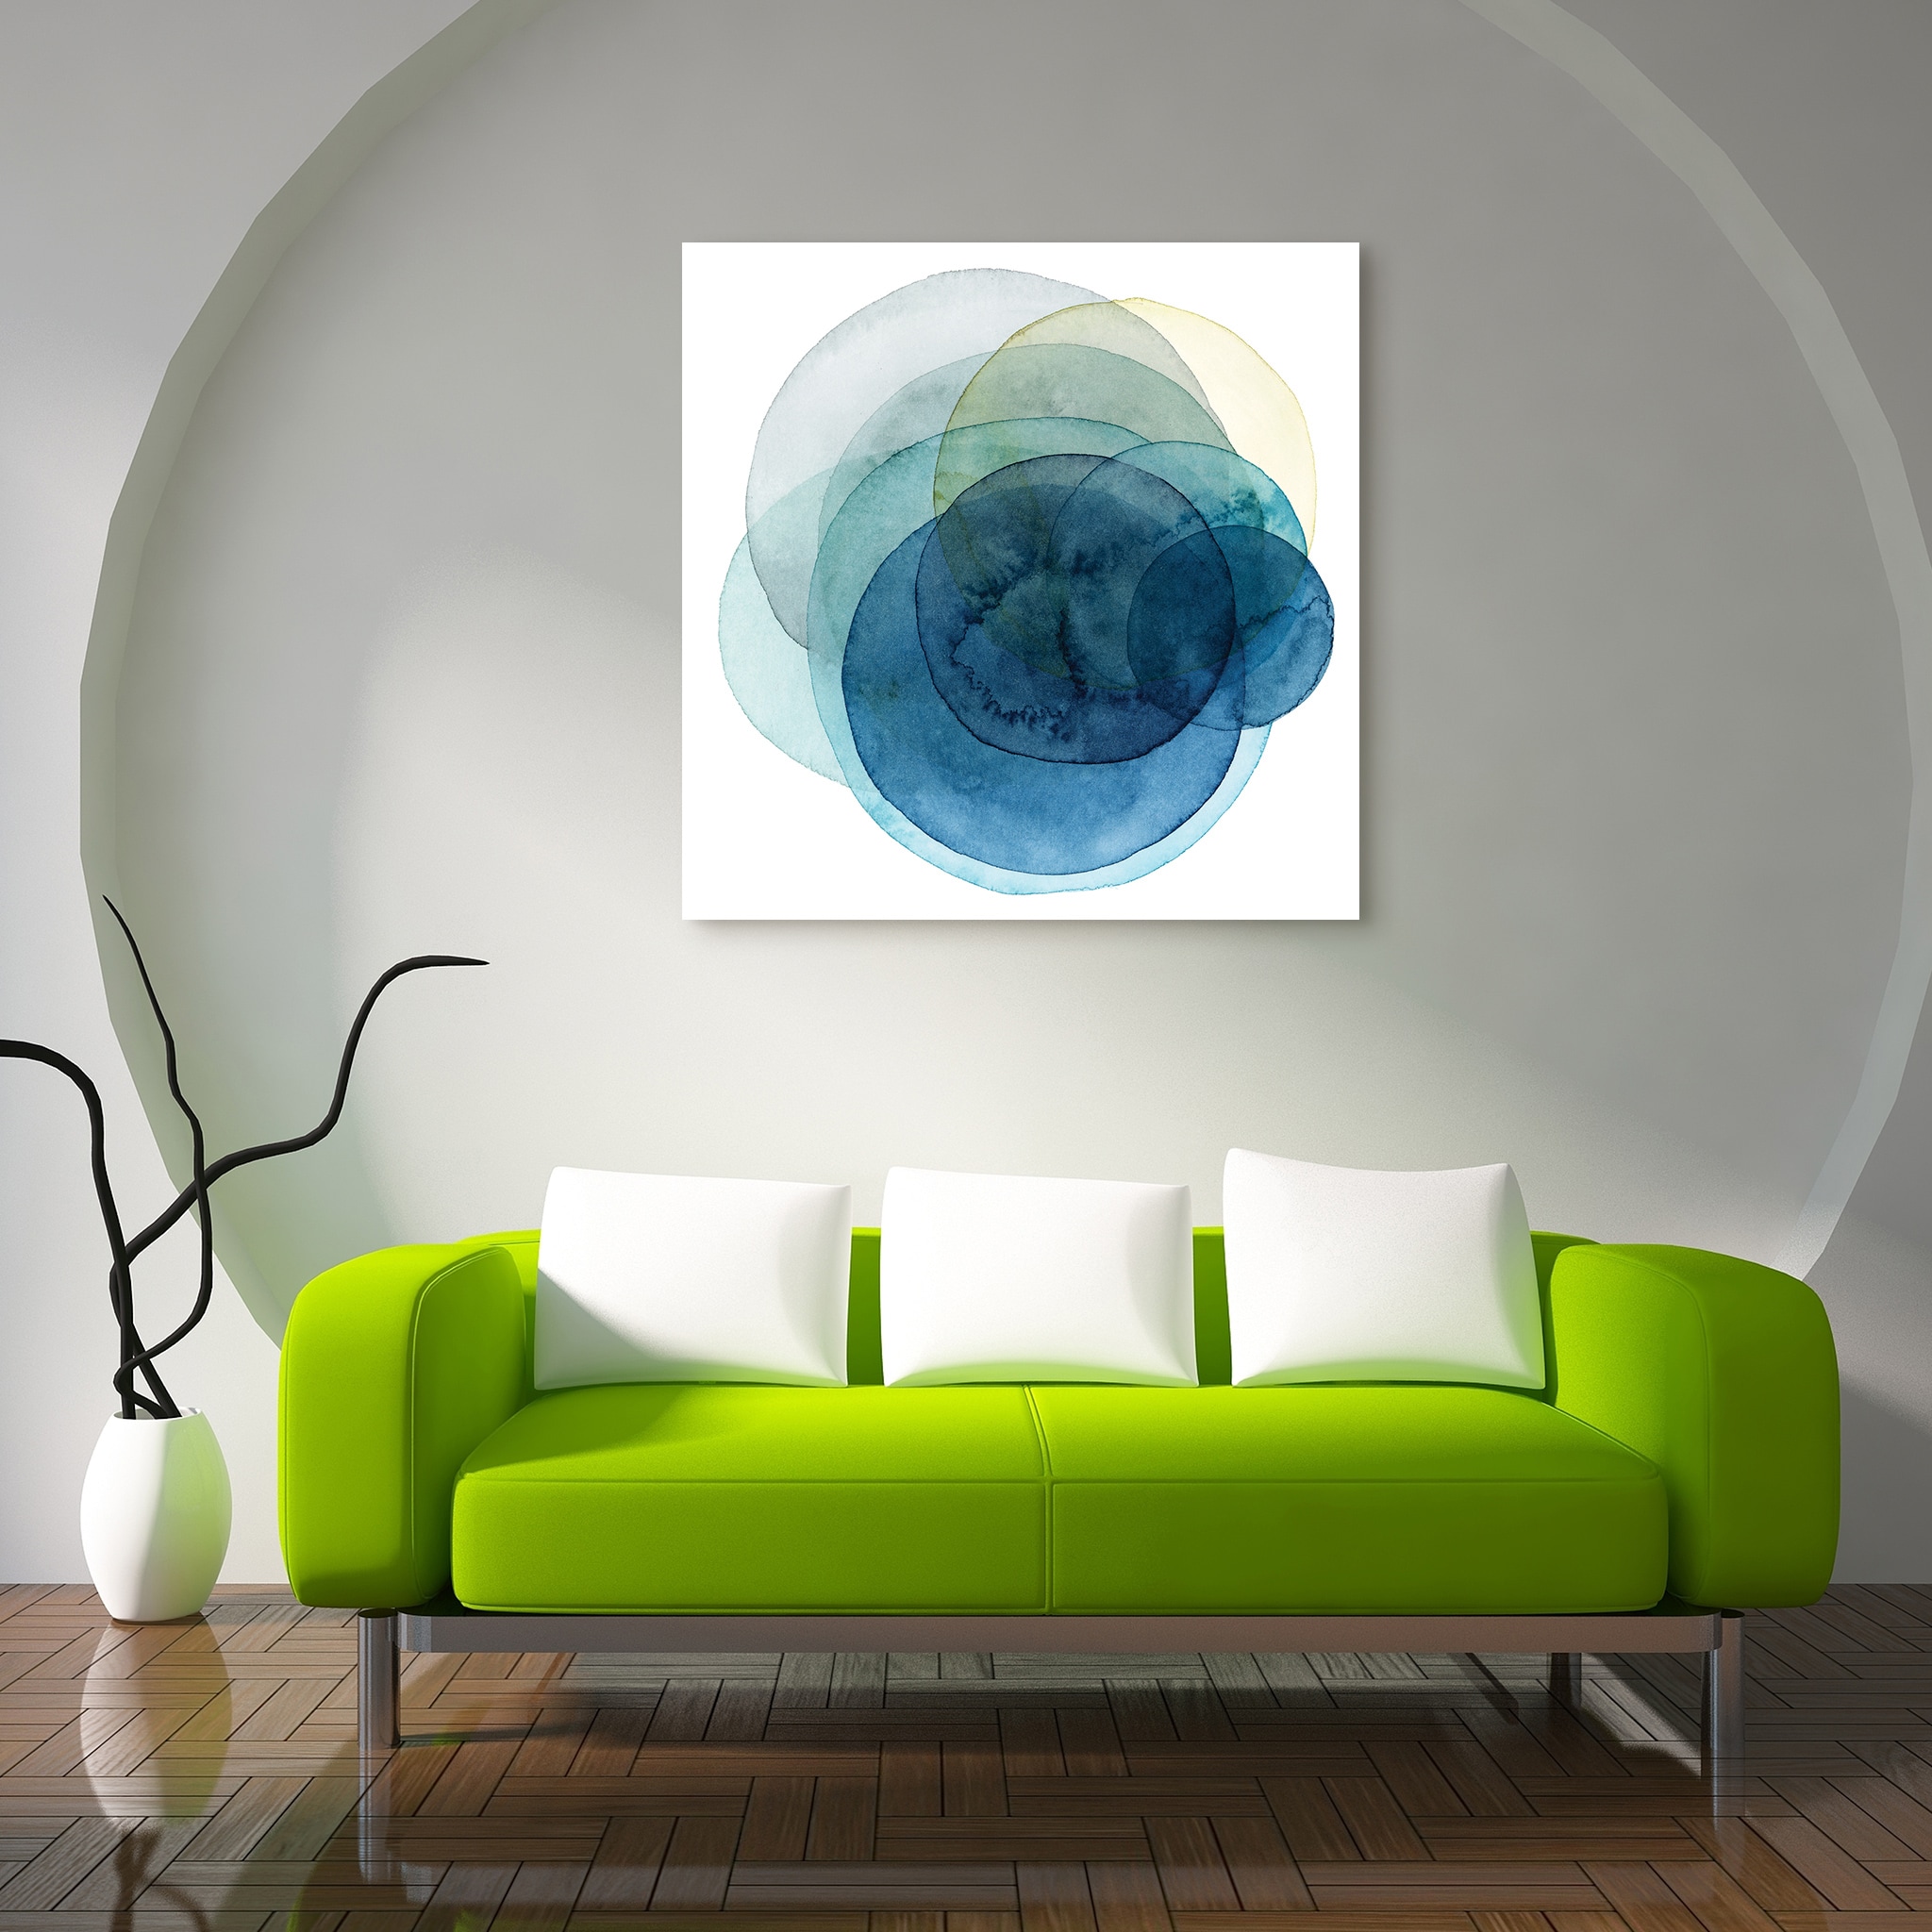 Empire Art Direct 38-in H x 38-in W Abstract Glass Print at Lowes.com